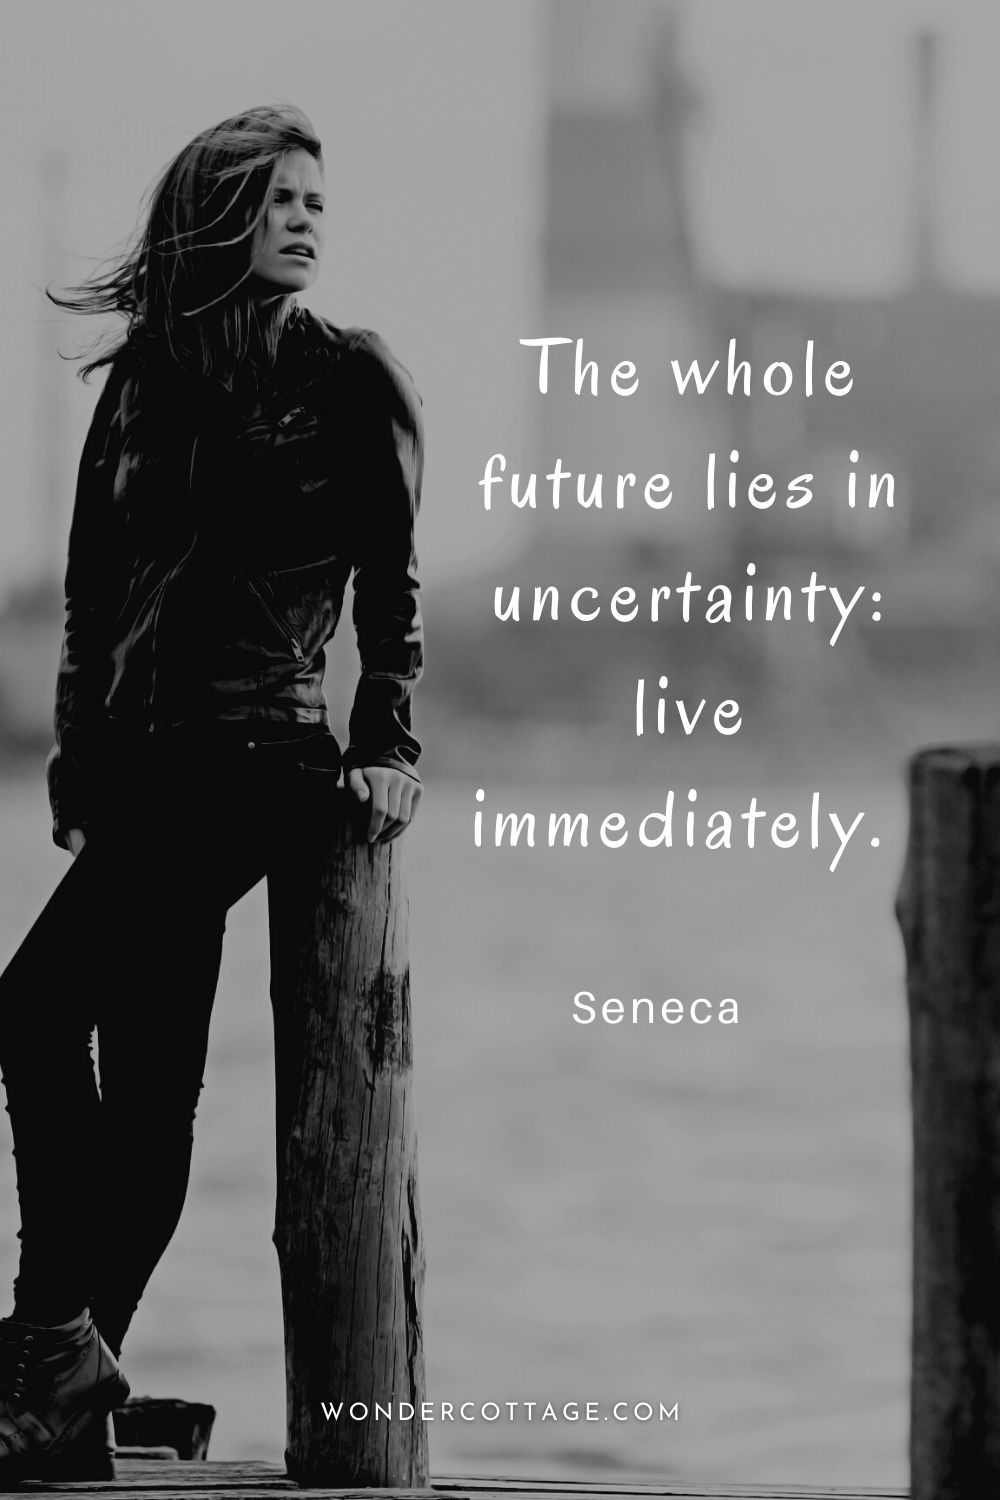 The whole future lies in uncertainty: live immediately.  Seneca